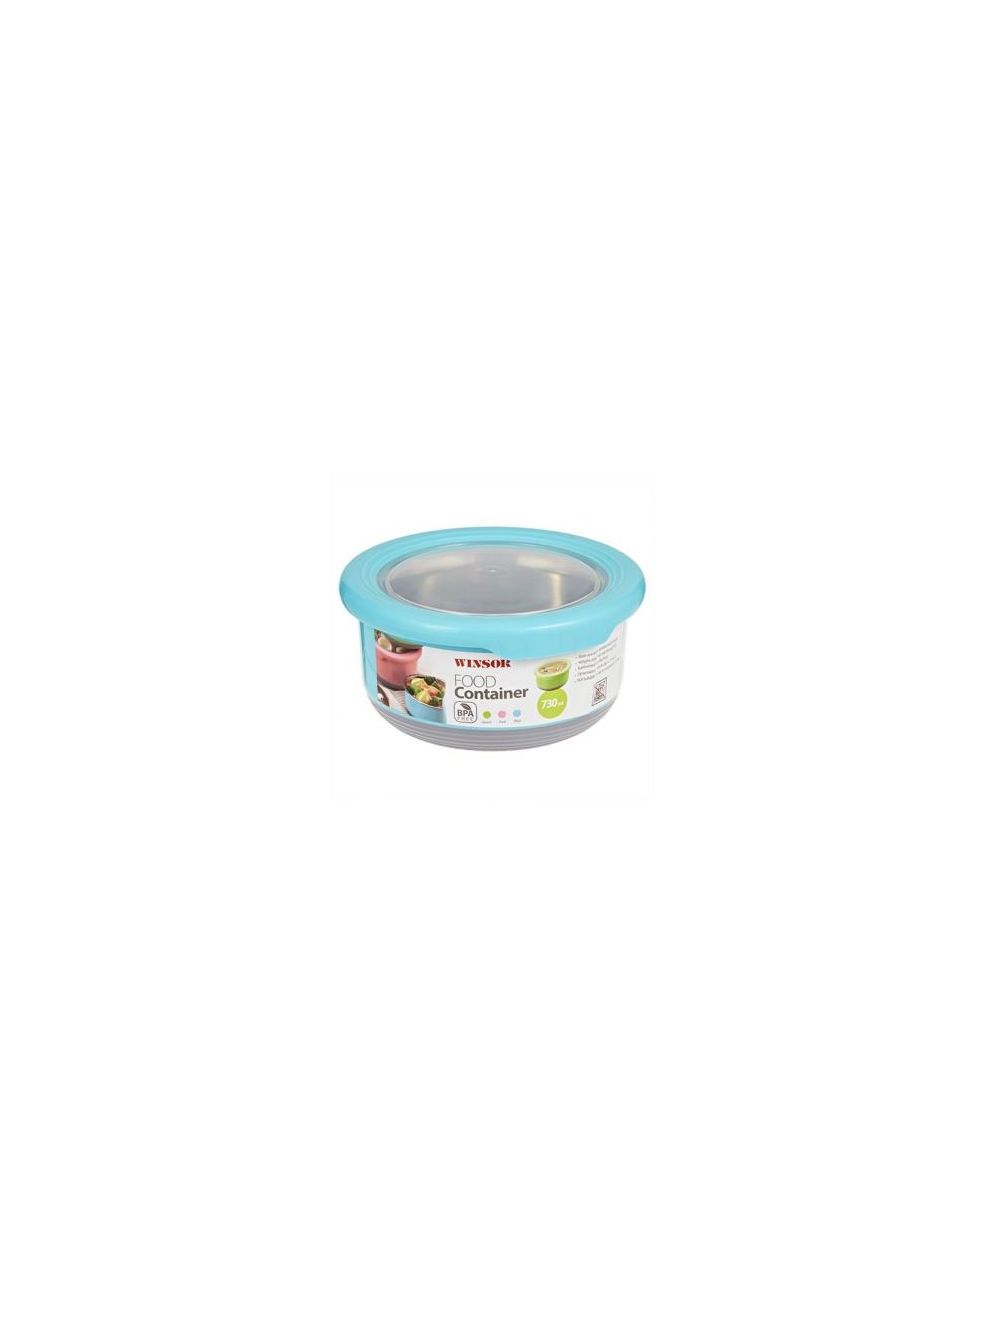 Winsor S/S Food Container 730 ml - Blue-WFC730-B